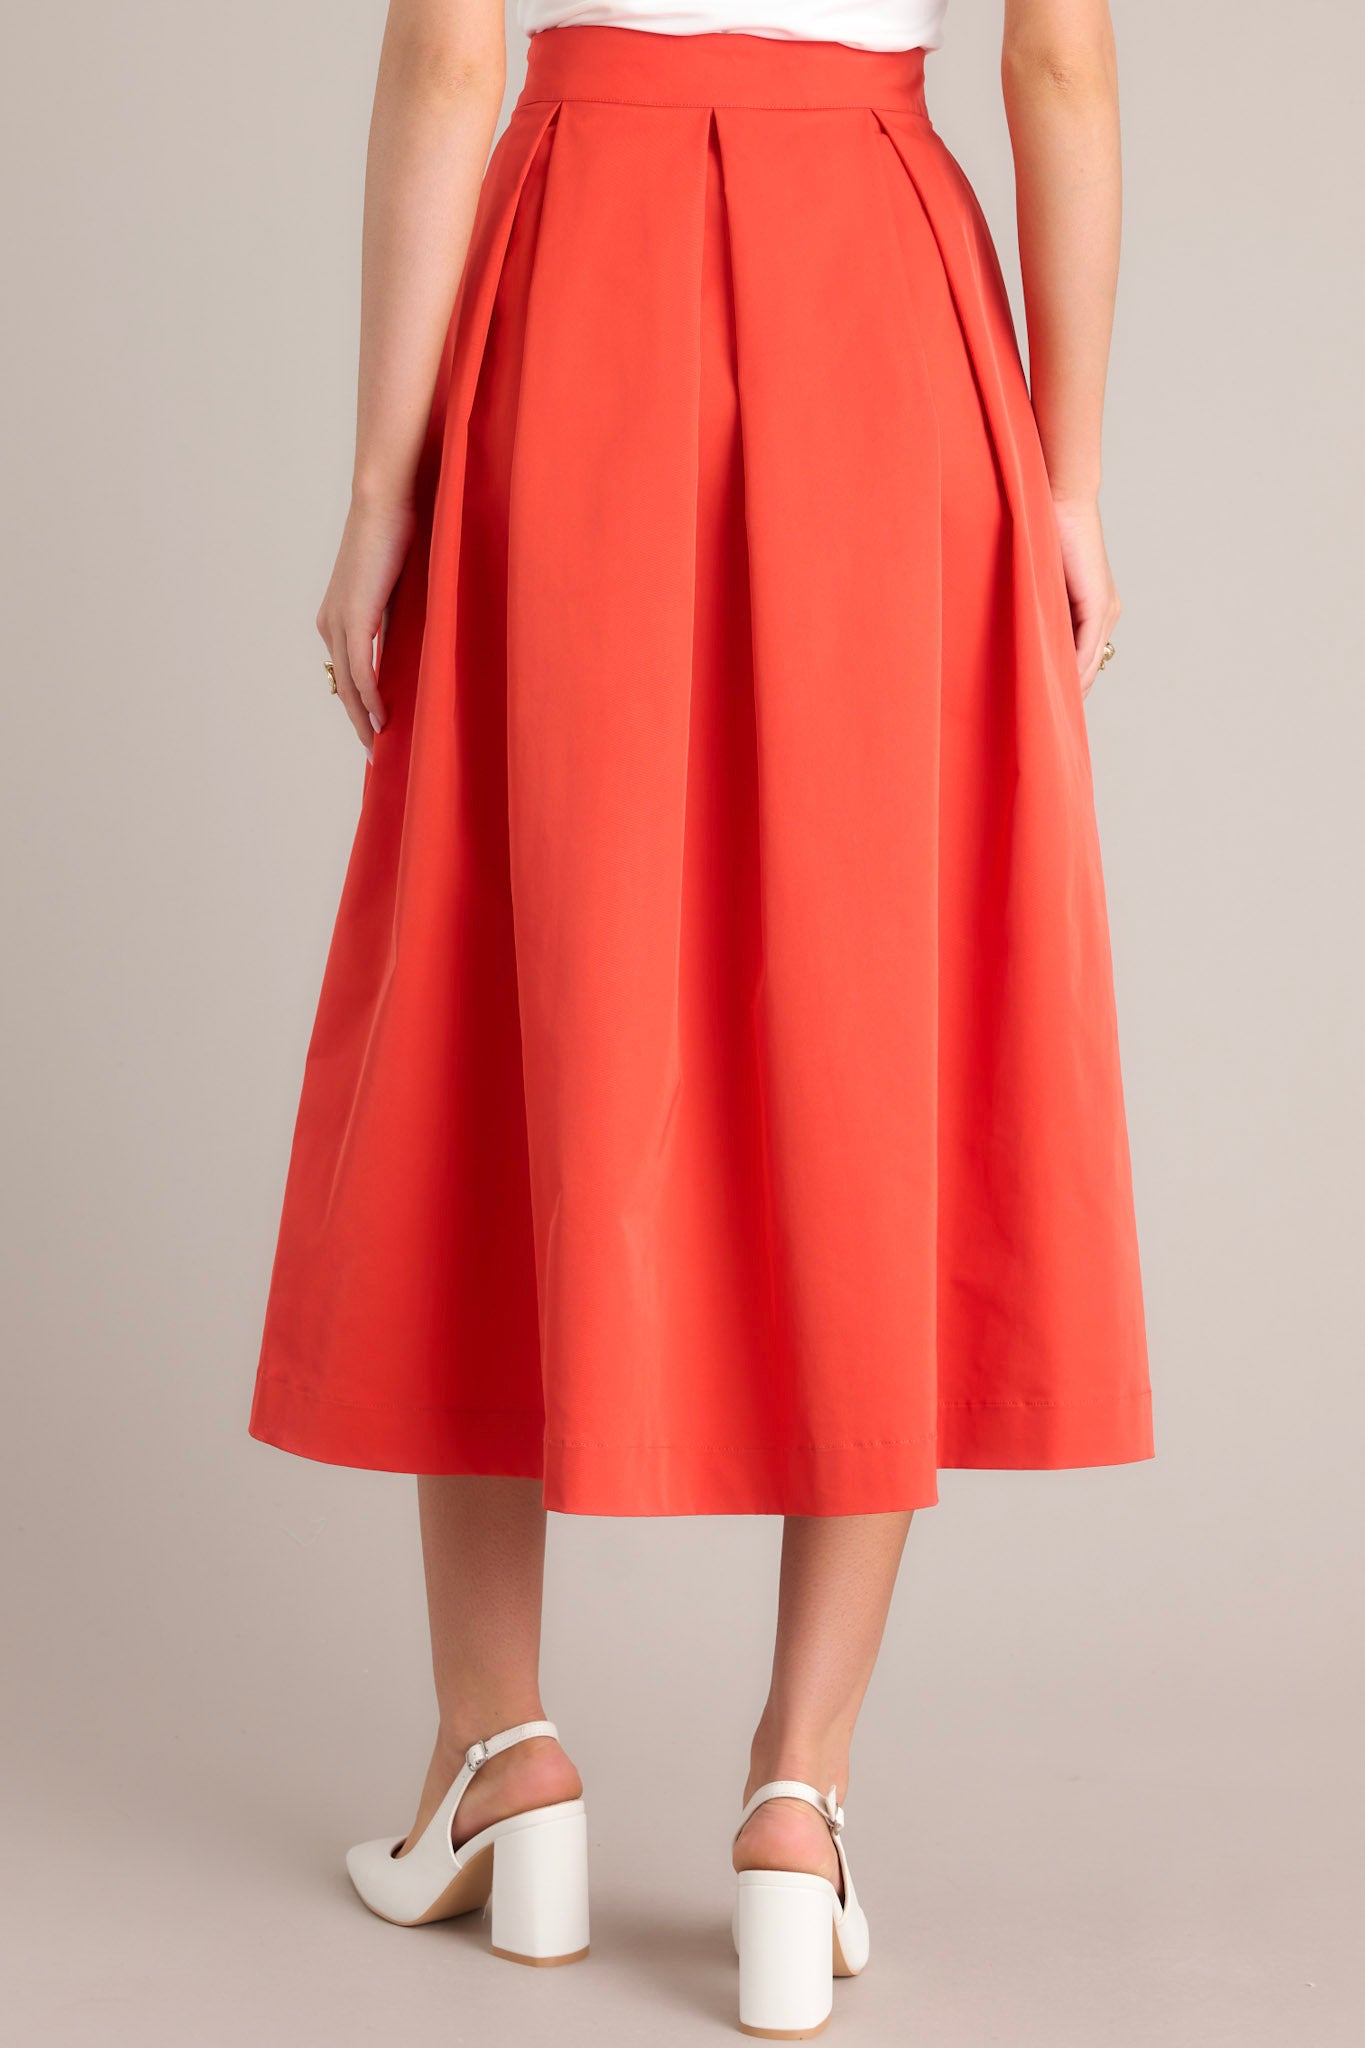 Back view of this tomato red midi skirt that features a high waisted design, a discrete side zipper, a thick waistline and functional pockets.